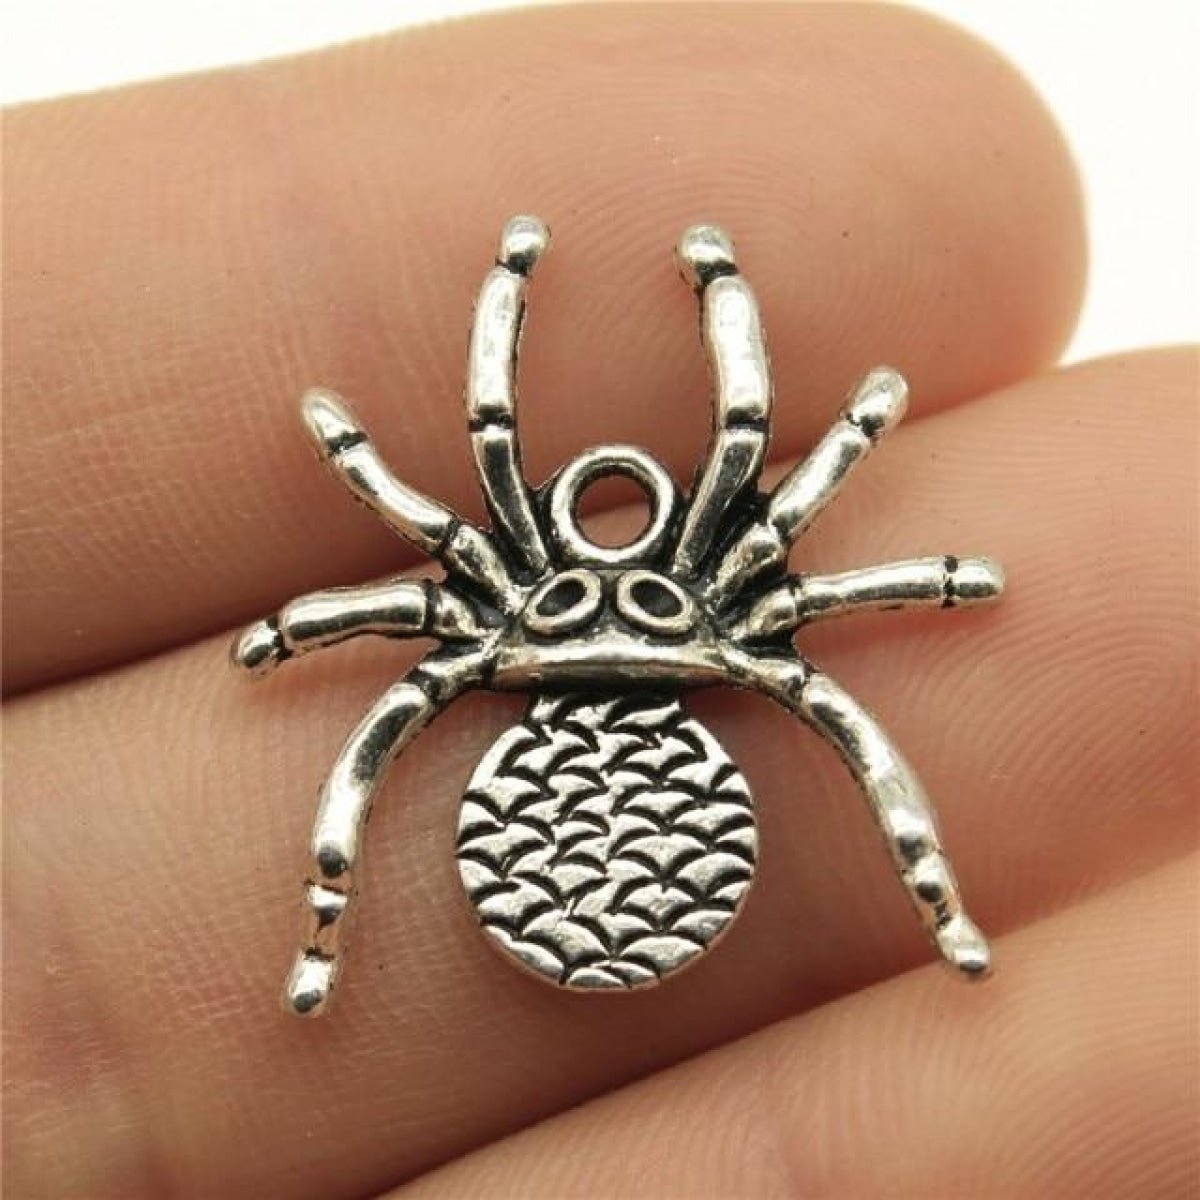 4pcs Spider Charms Antique Silver Colour Spider Charms Pendants For Bracelets Spider Cobweb Charms Making Jewellery - B - - Asia Sell